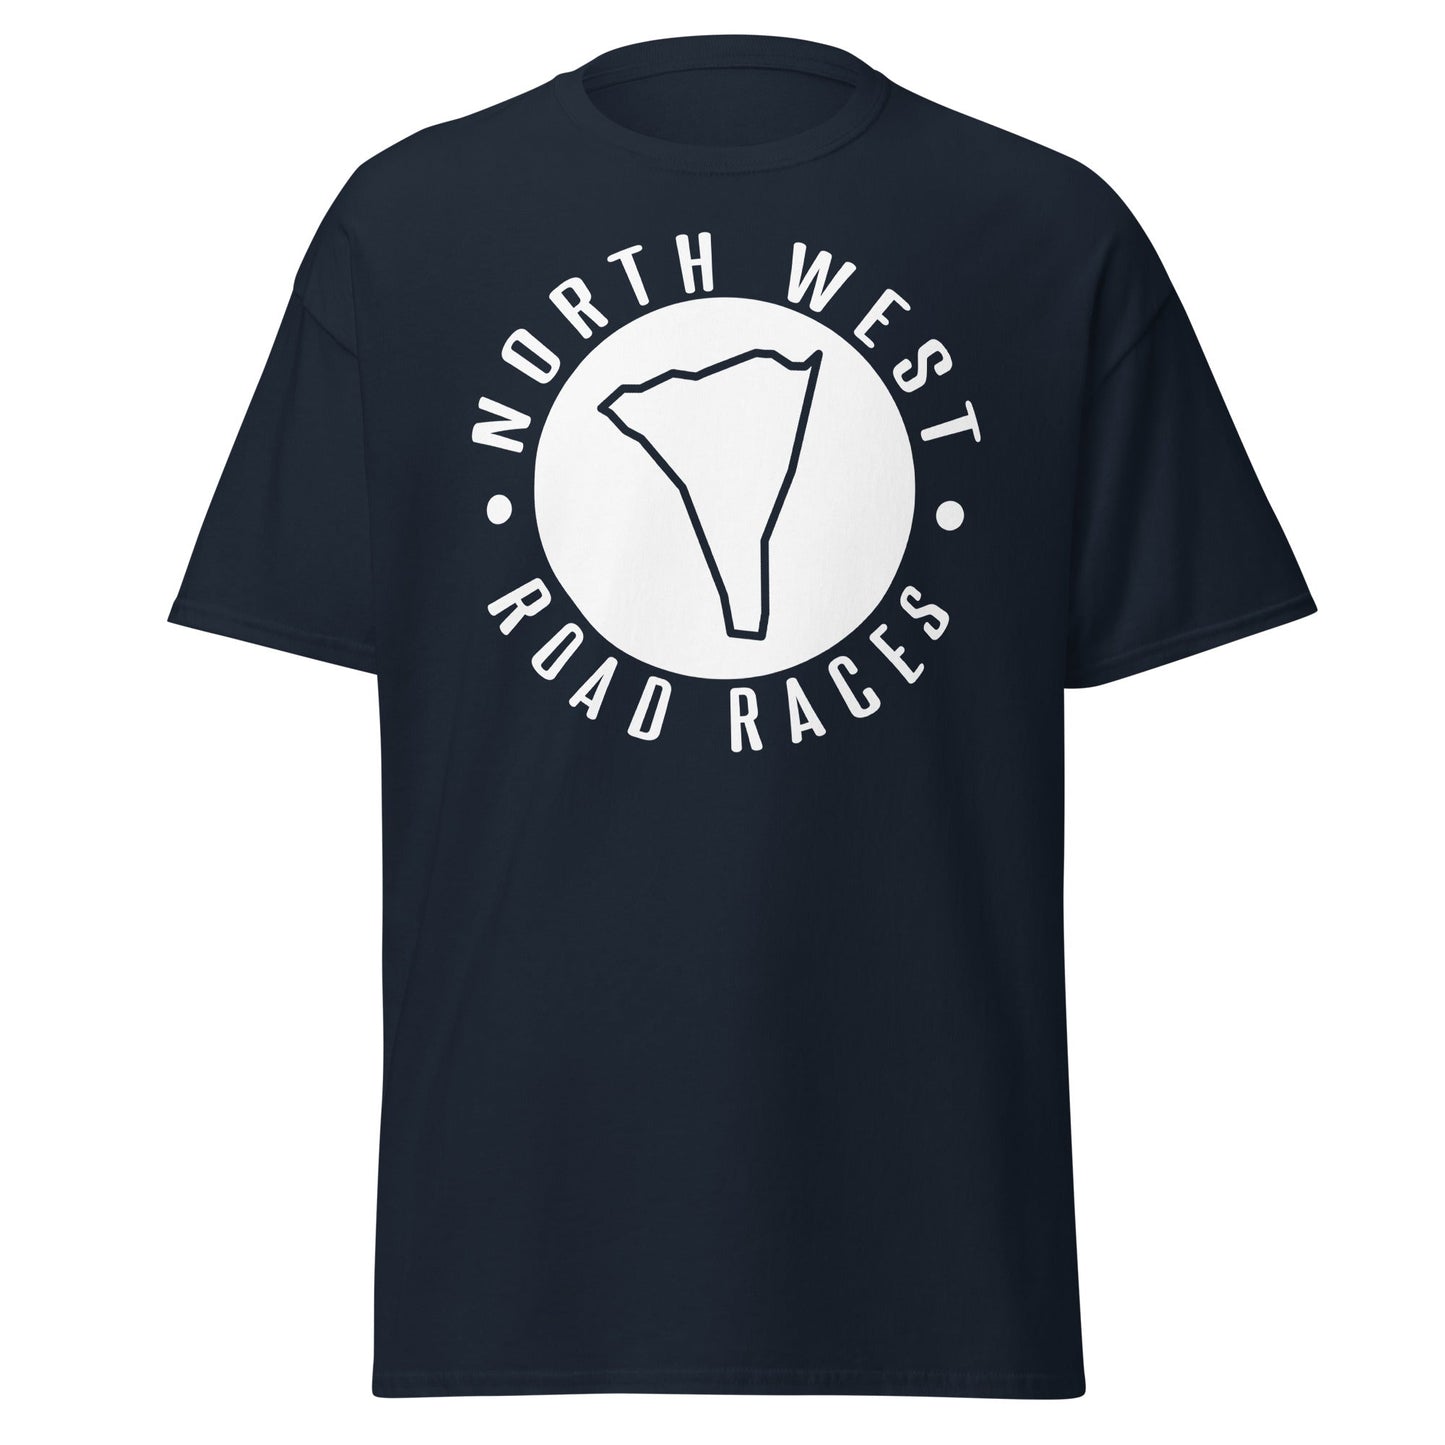 North West 200 Road Races T Shirt (Navy) - Rotherhams